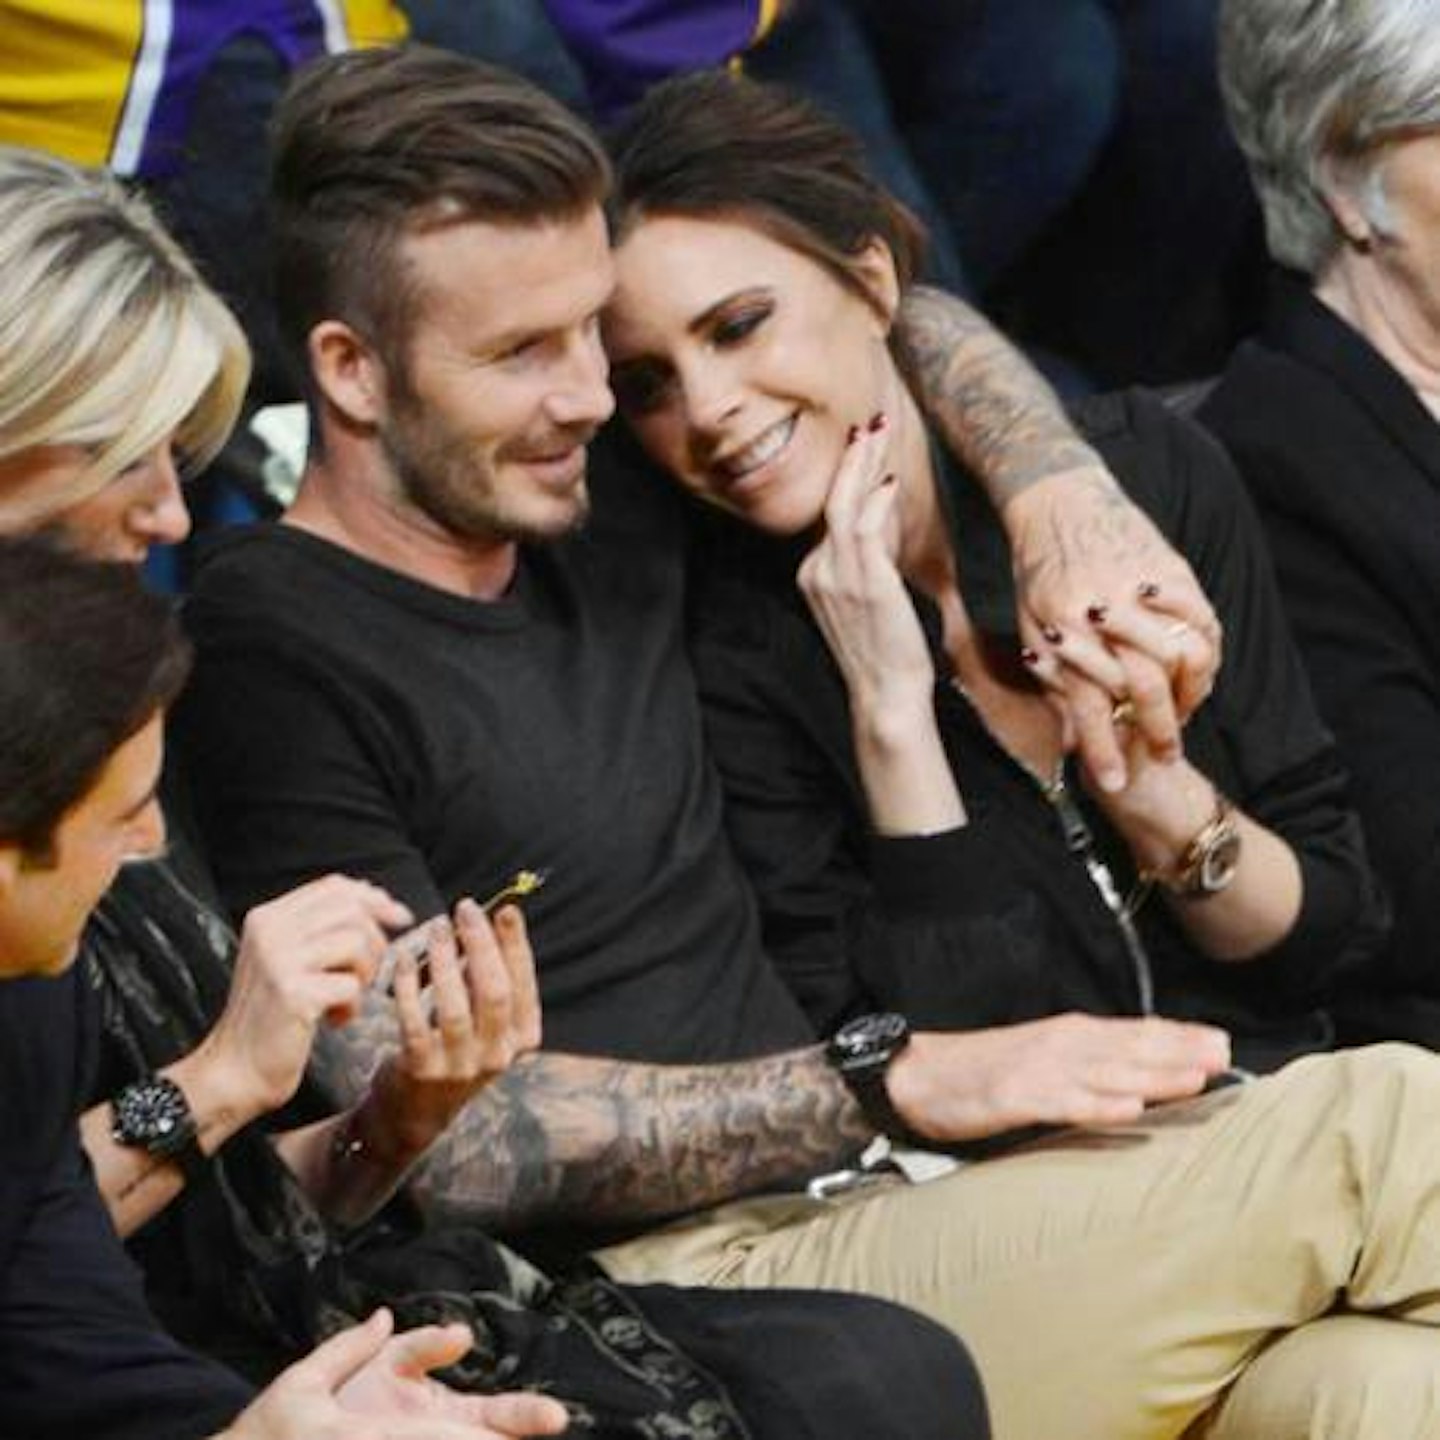 Victoria Beckham is one of the wolrd's best known fashion designers - and she definitely seems happy doing it with David's name!